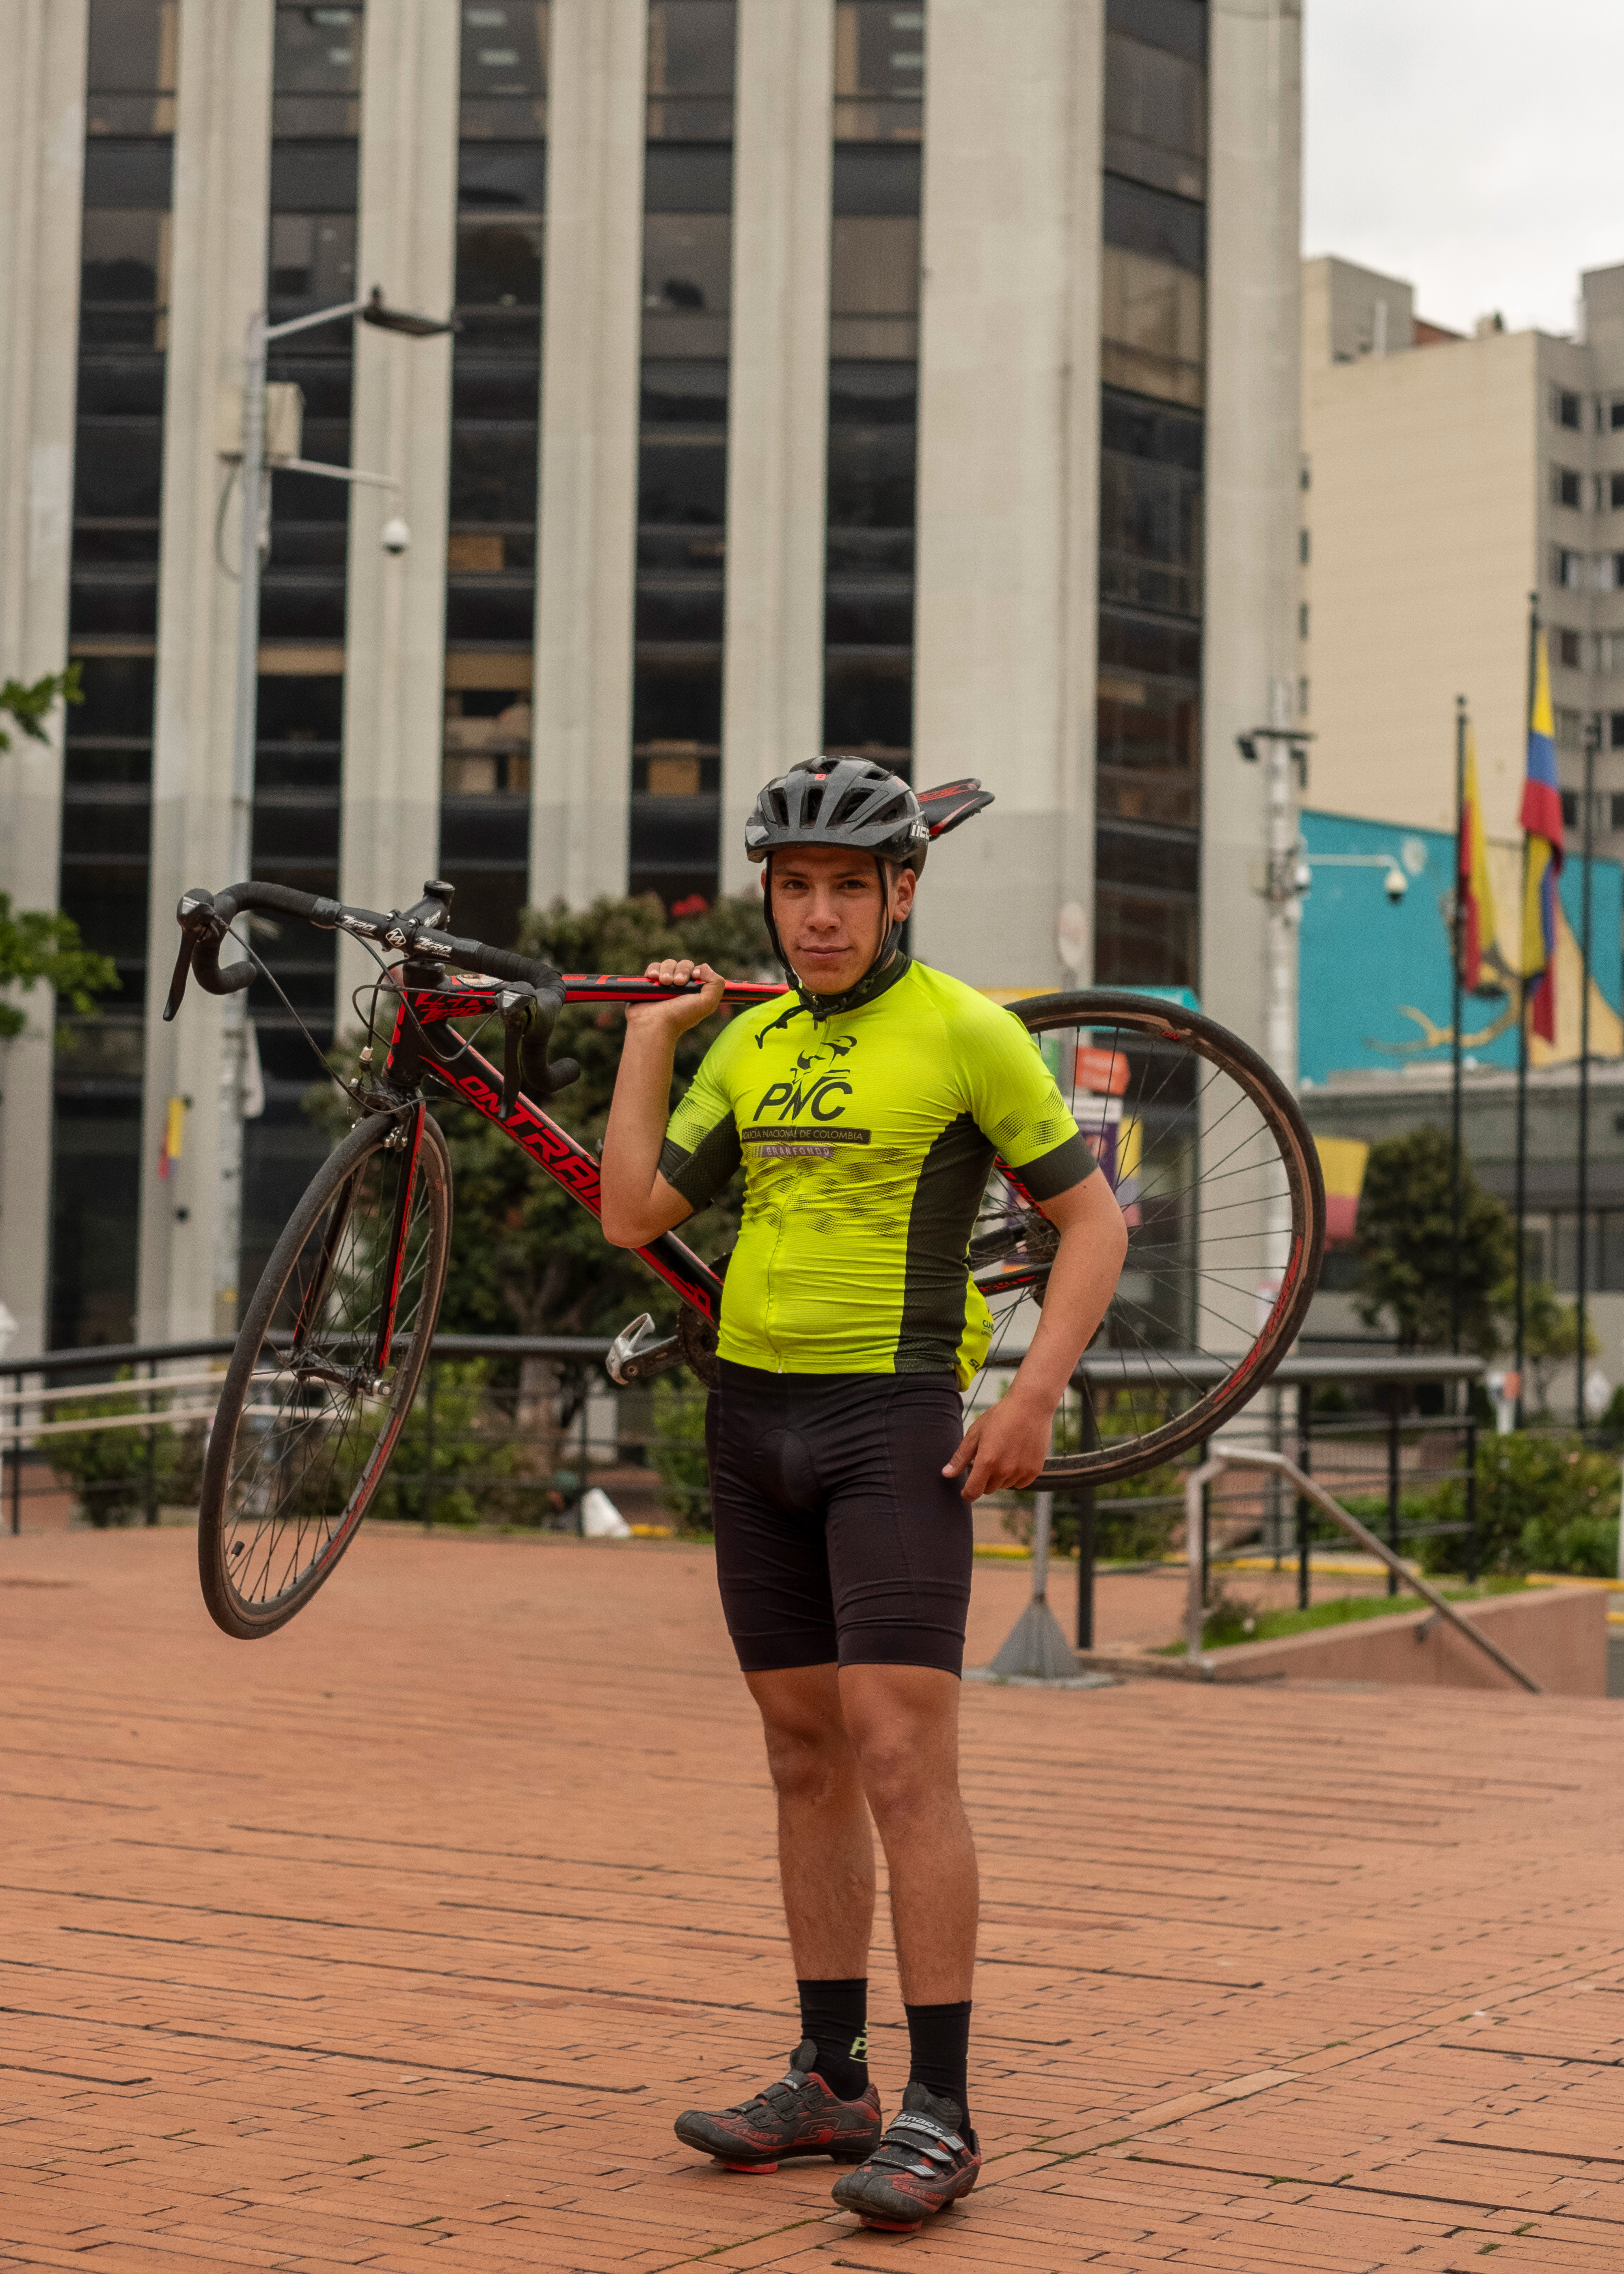 Javier C. works as a security guard in a housing complex in the north of Bogotá. An avid cyclist, he prefers to ride in the more well-guarded north where he feels safest.